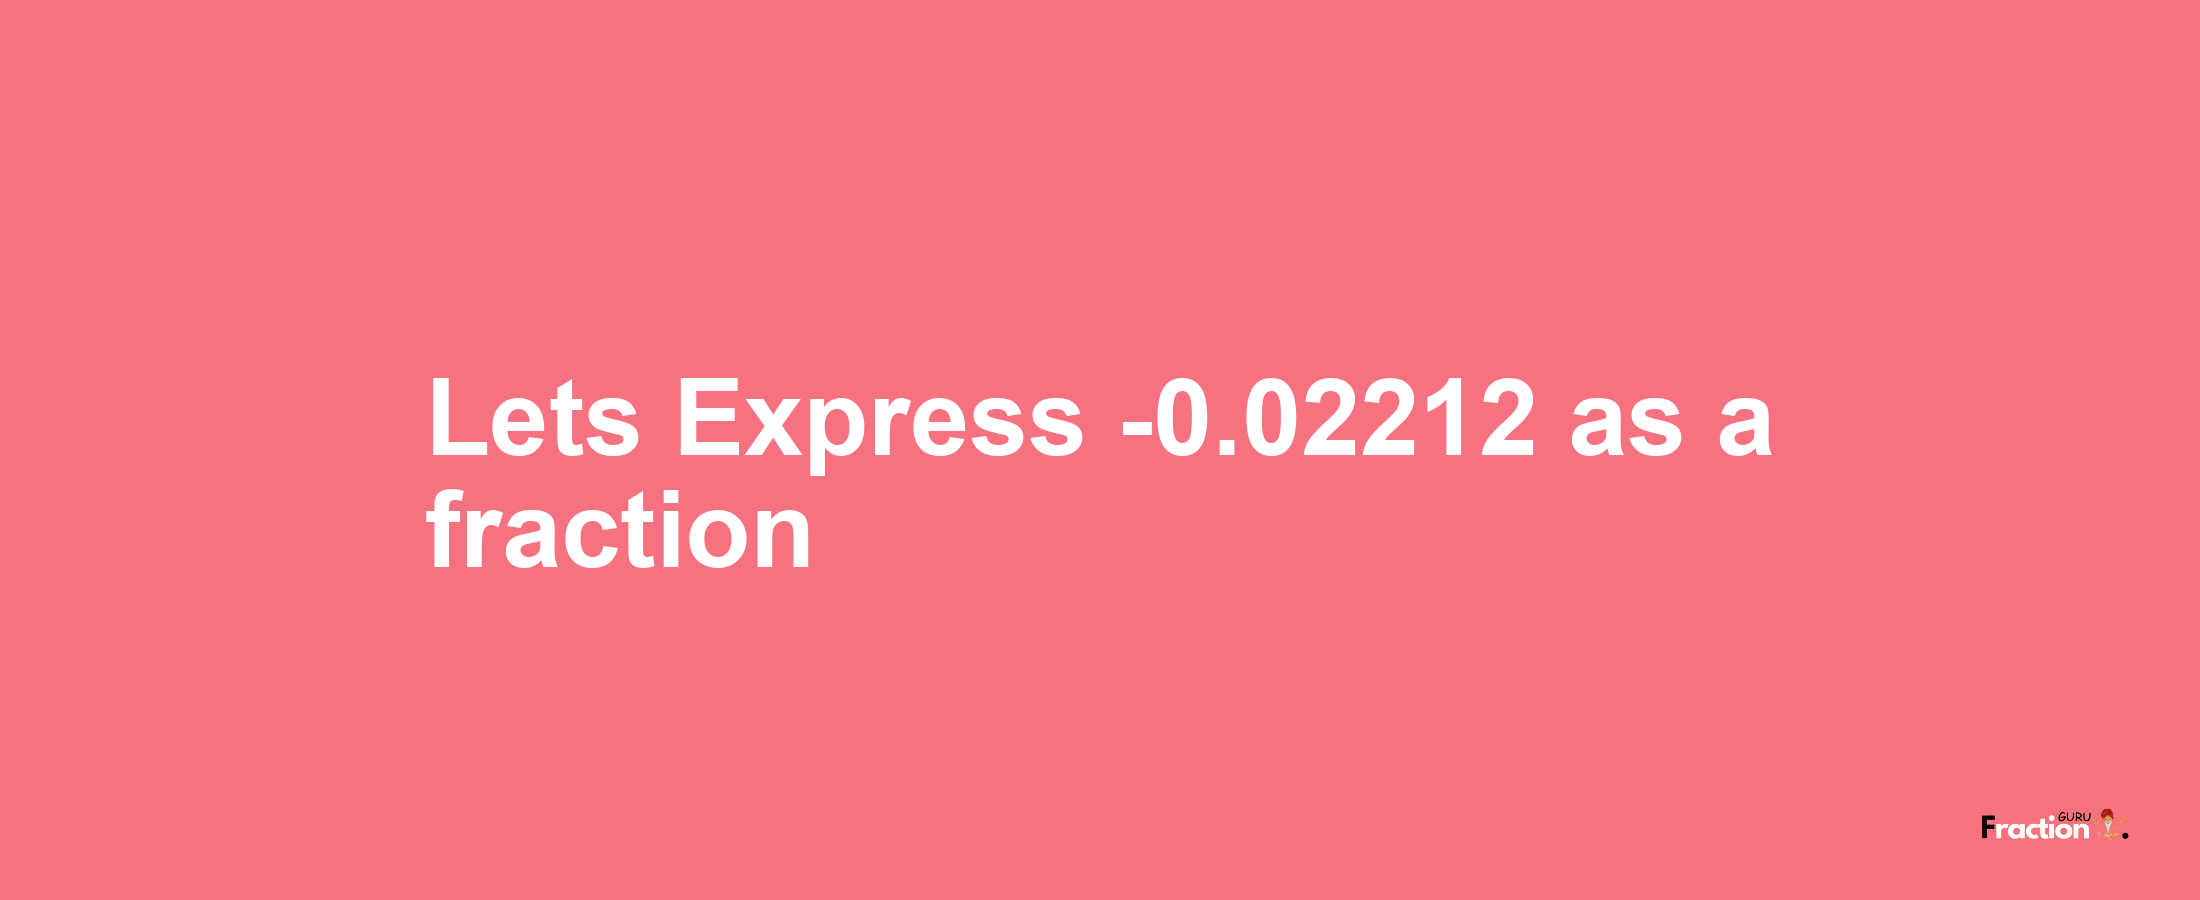 Lets Express -0.02212 as afraction